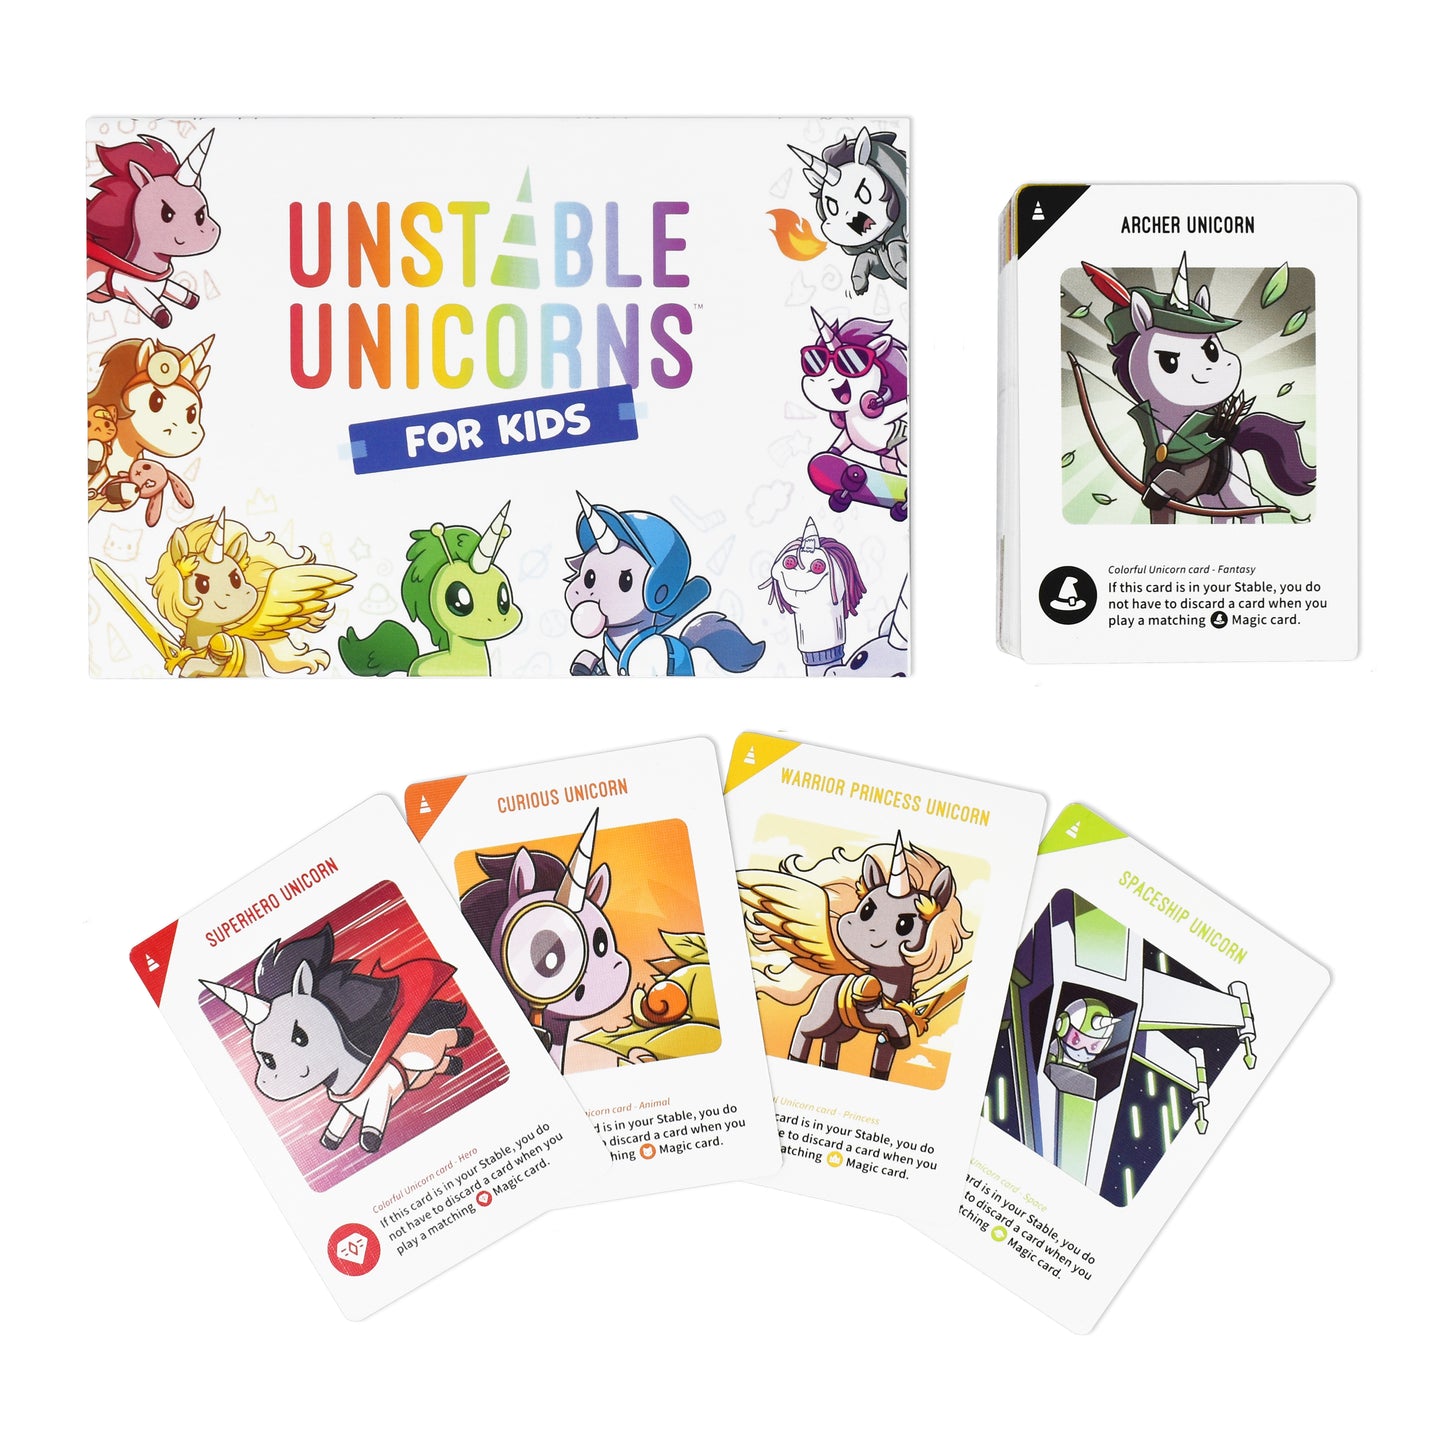 Box and cards from "Unstable Unicorns for Kids: Base Game" strategy game, featuring colorful cartoon unicorn characters by Unstable Games.